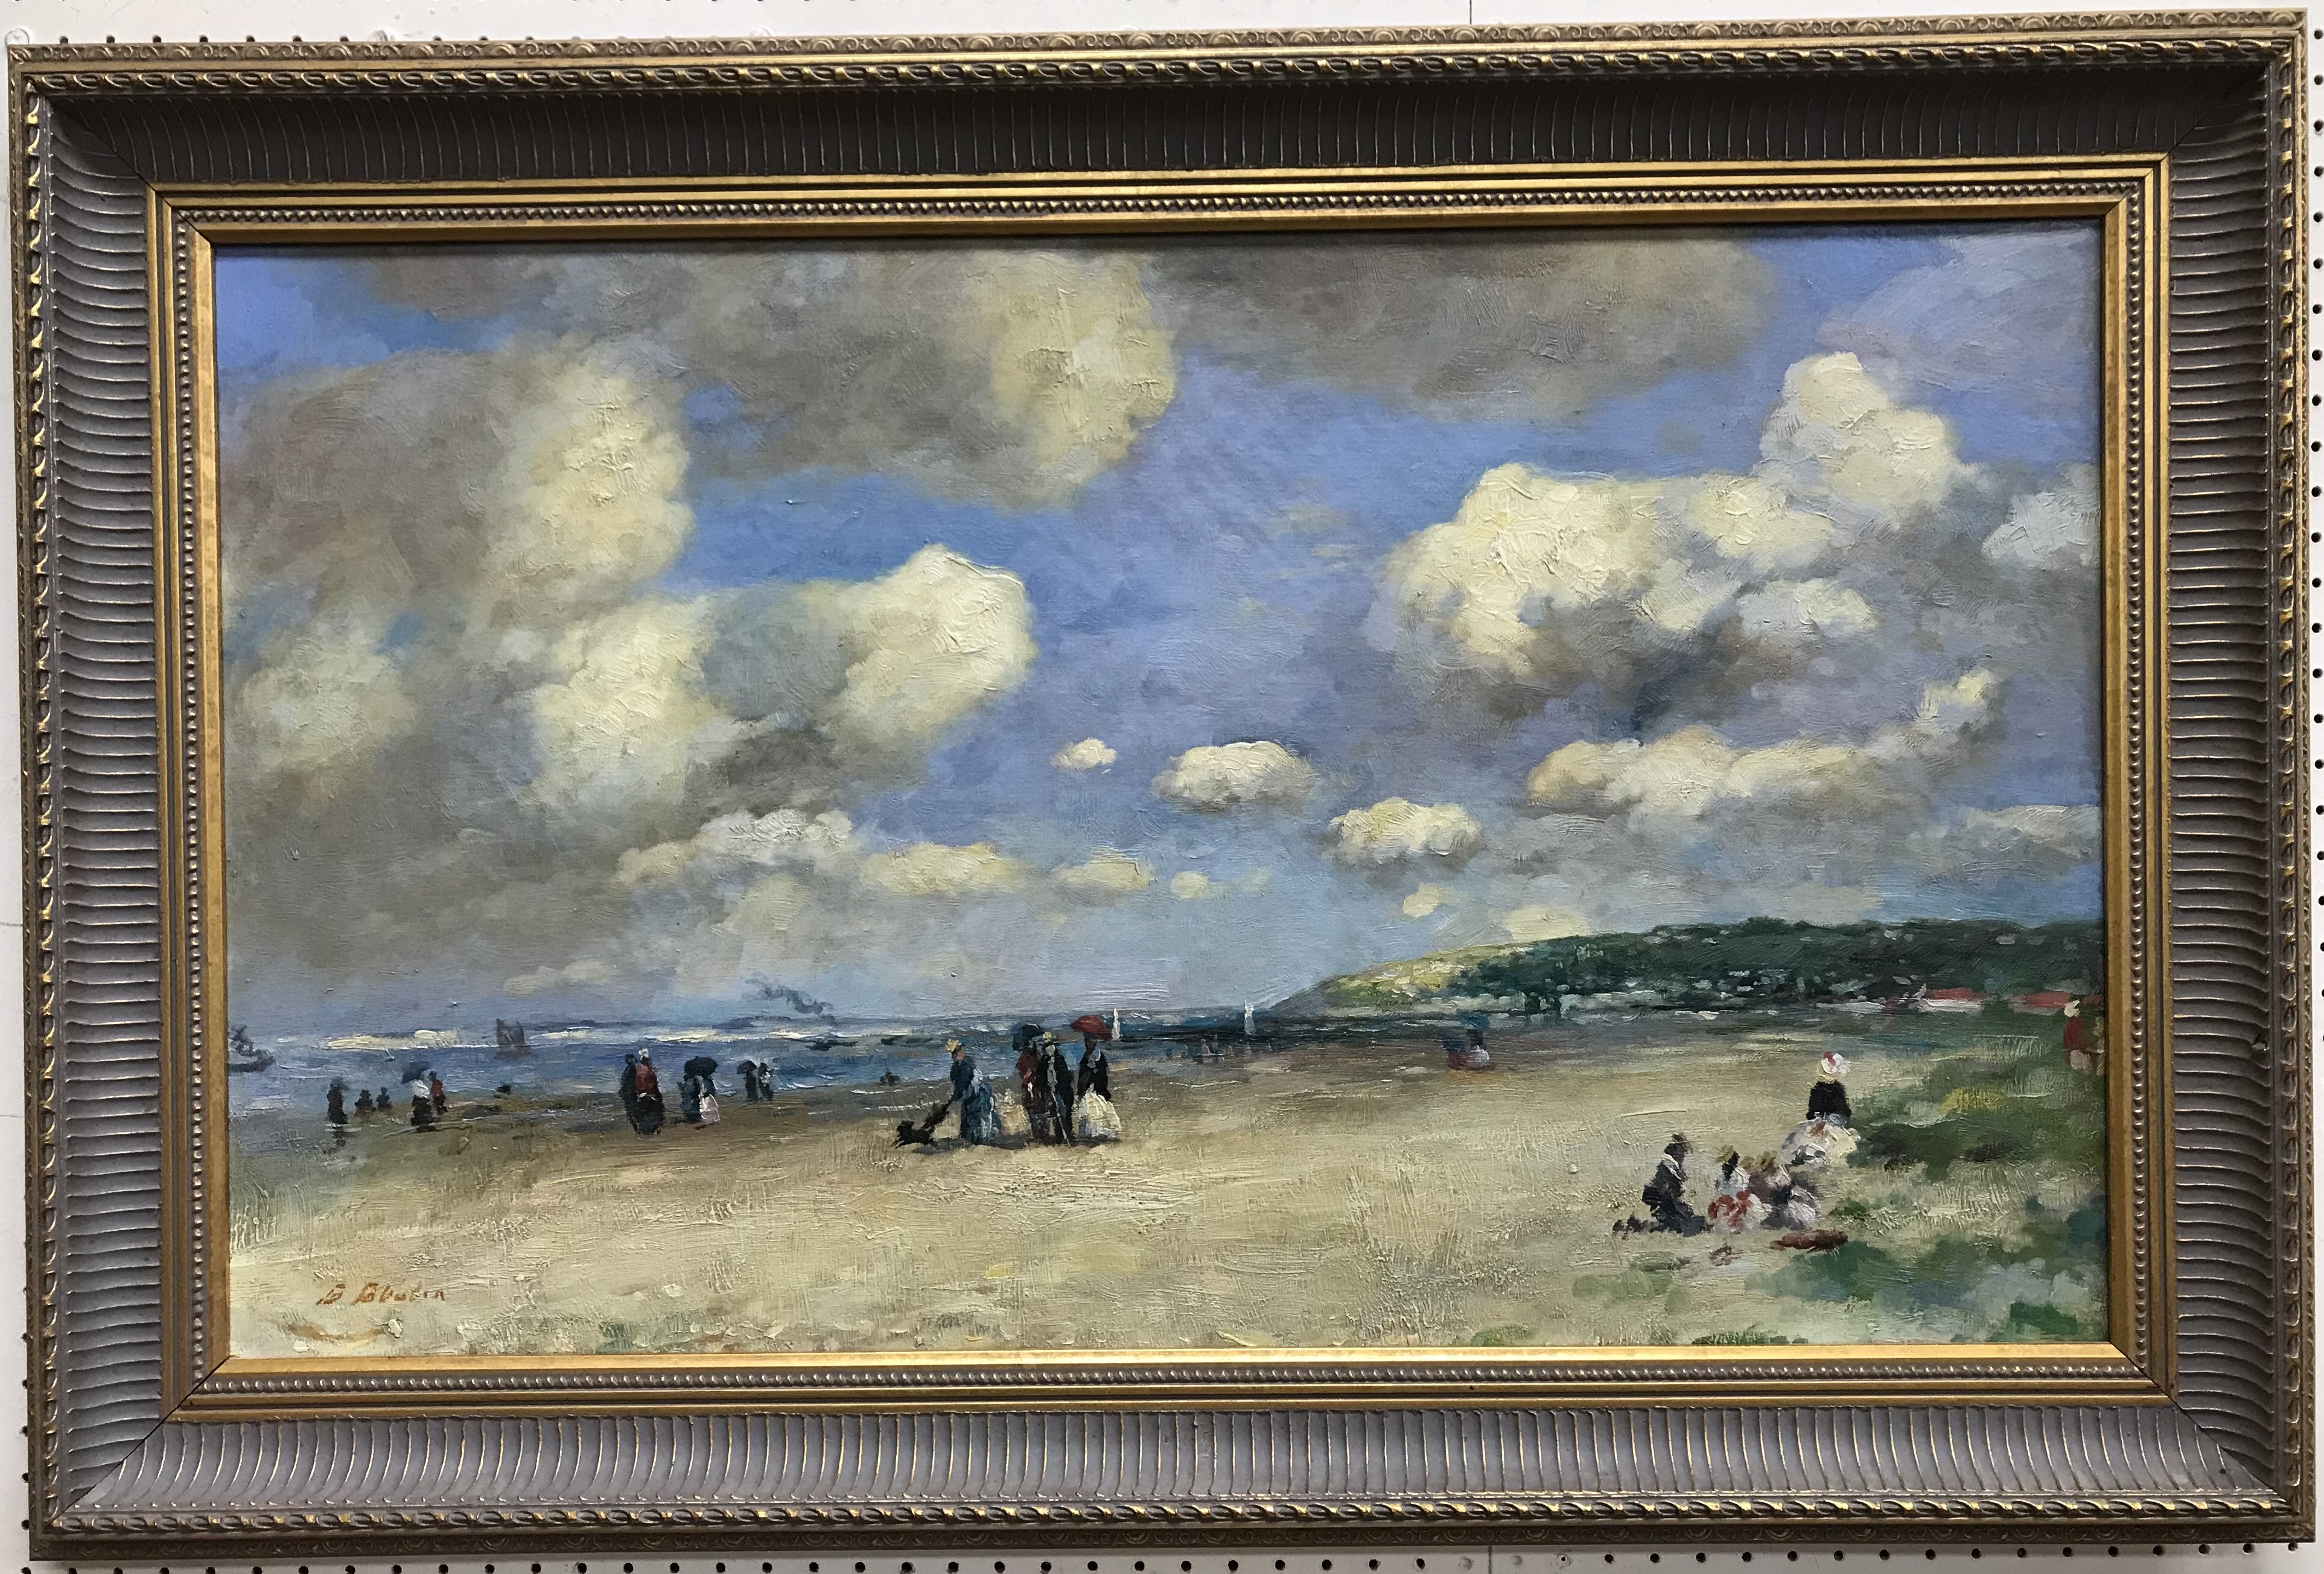 ATTRIBUTED TO EUGENE BOUDIN "Beach scene with figures", oil on canvas, - Image 2 of 3